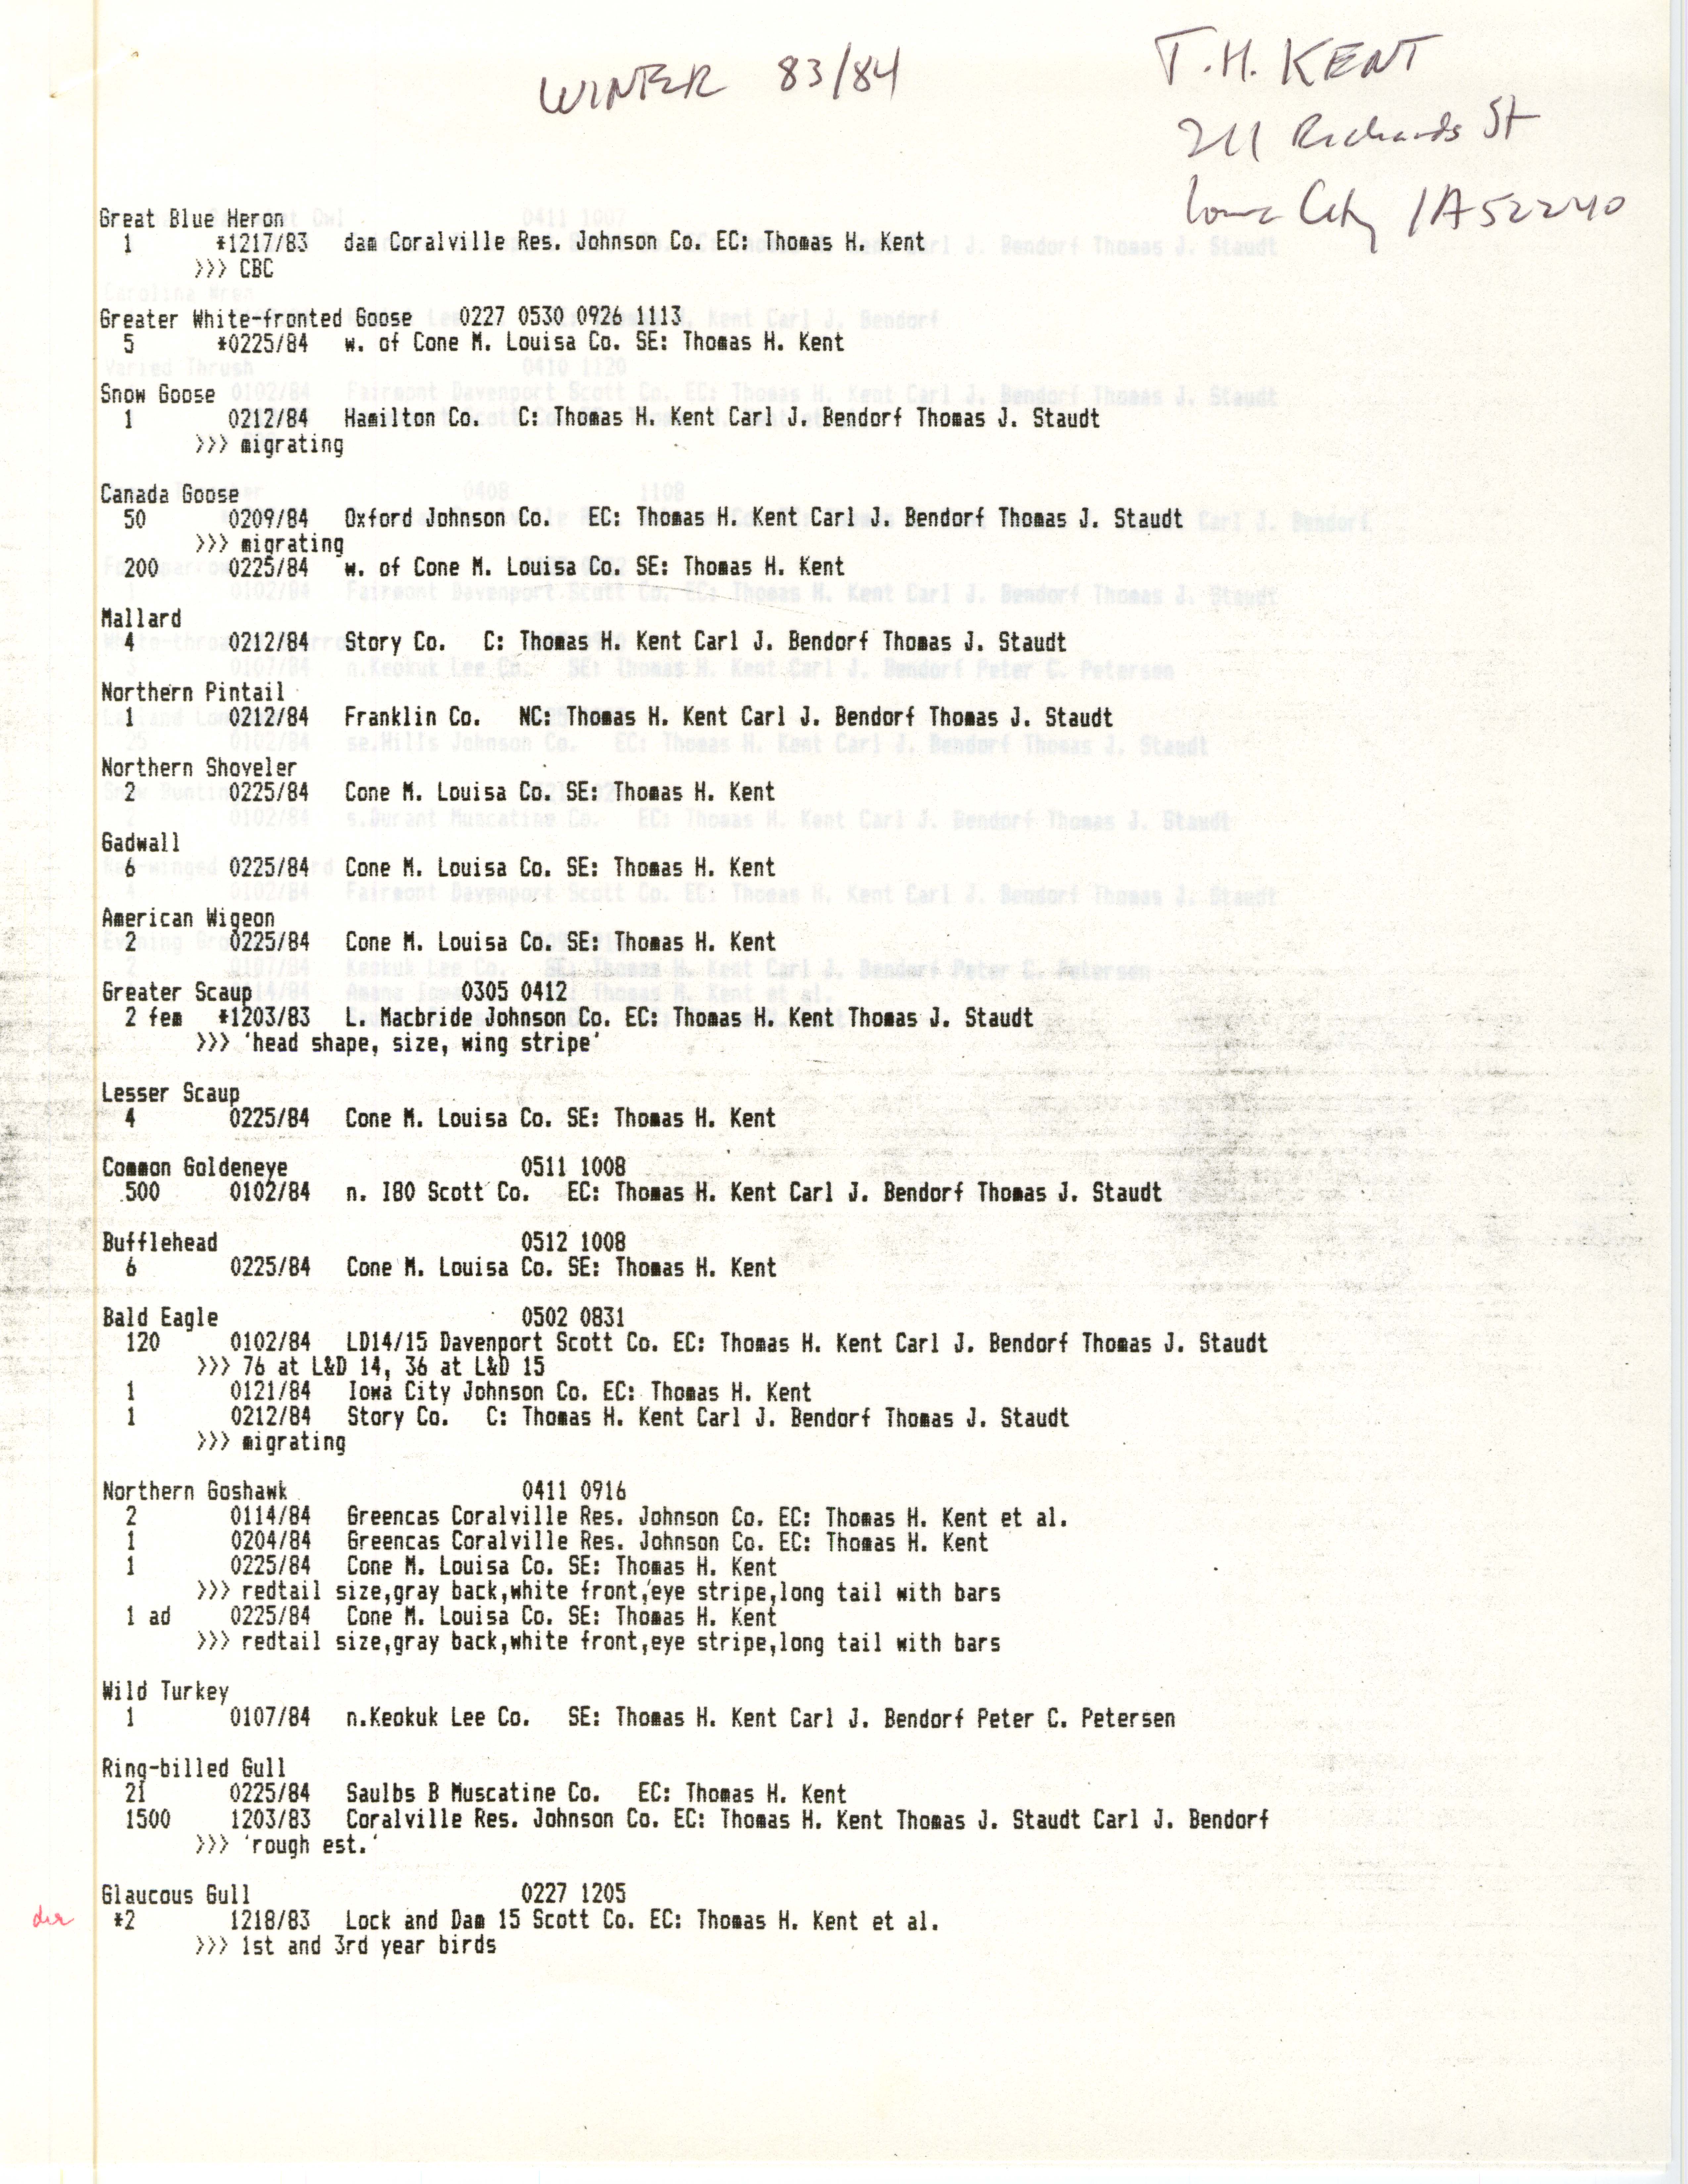 Field reports data contributed by Thomas H. Kent and others, winter 1983-1984